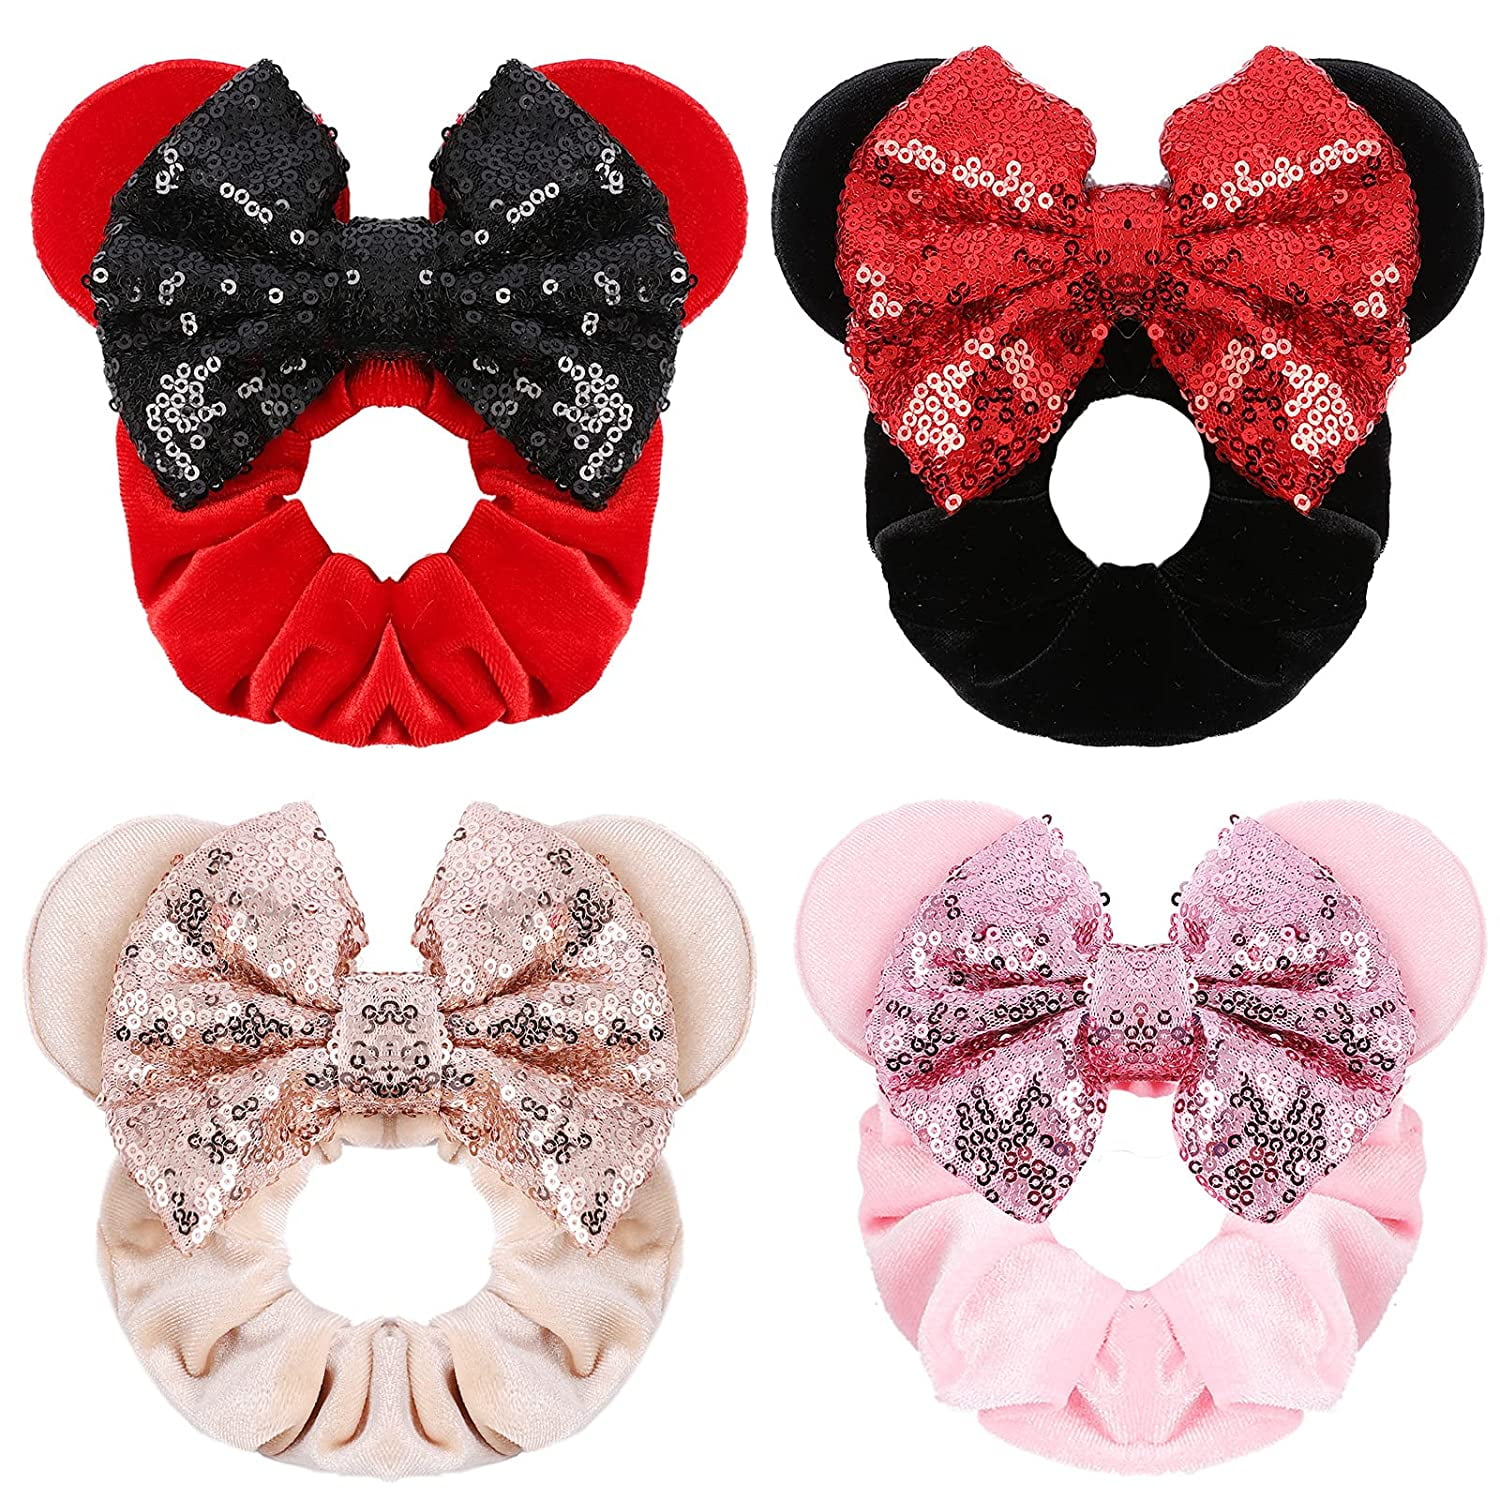 Bow Rubber Hair Rope Ponytail Holder Hair Tie Band Hair Accessories for Women